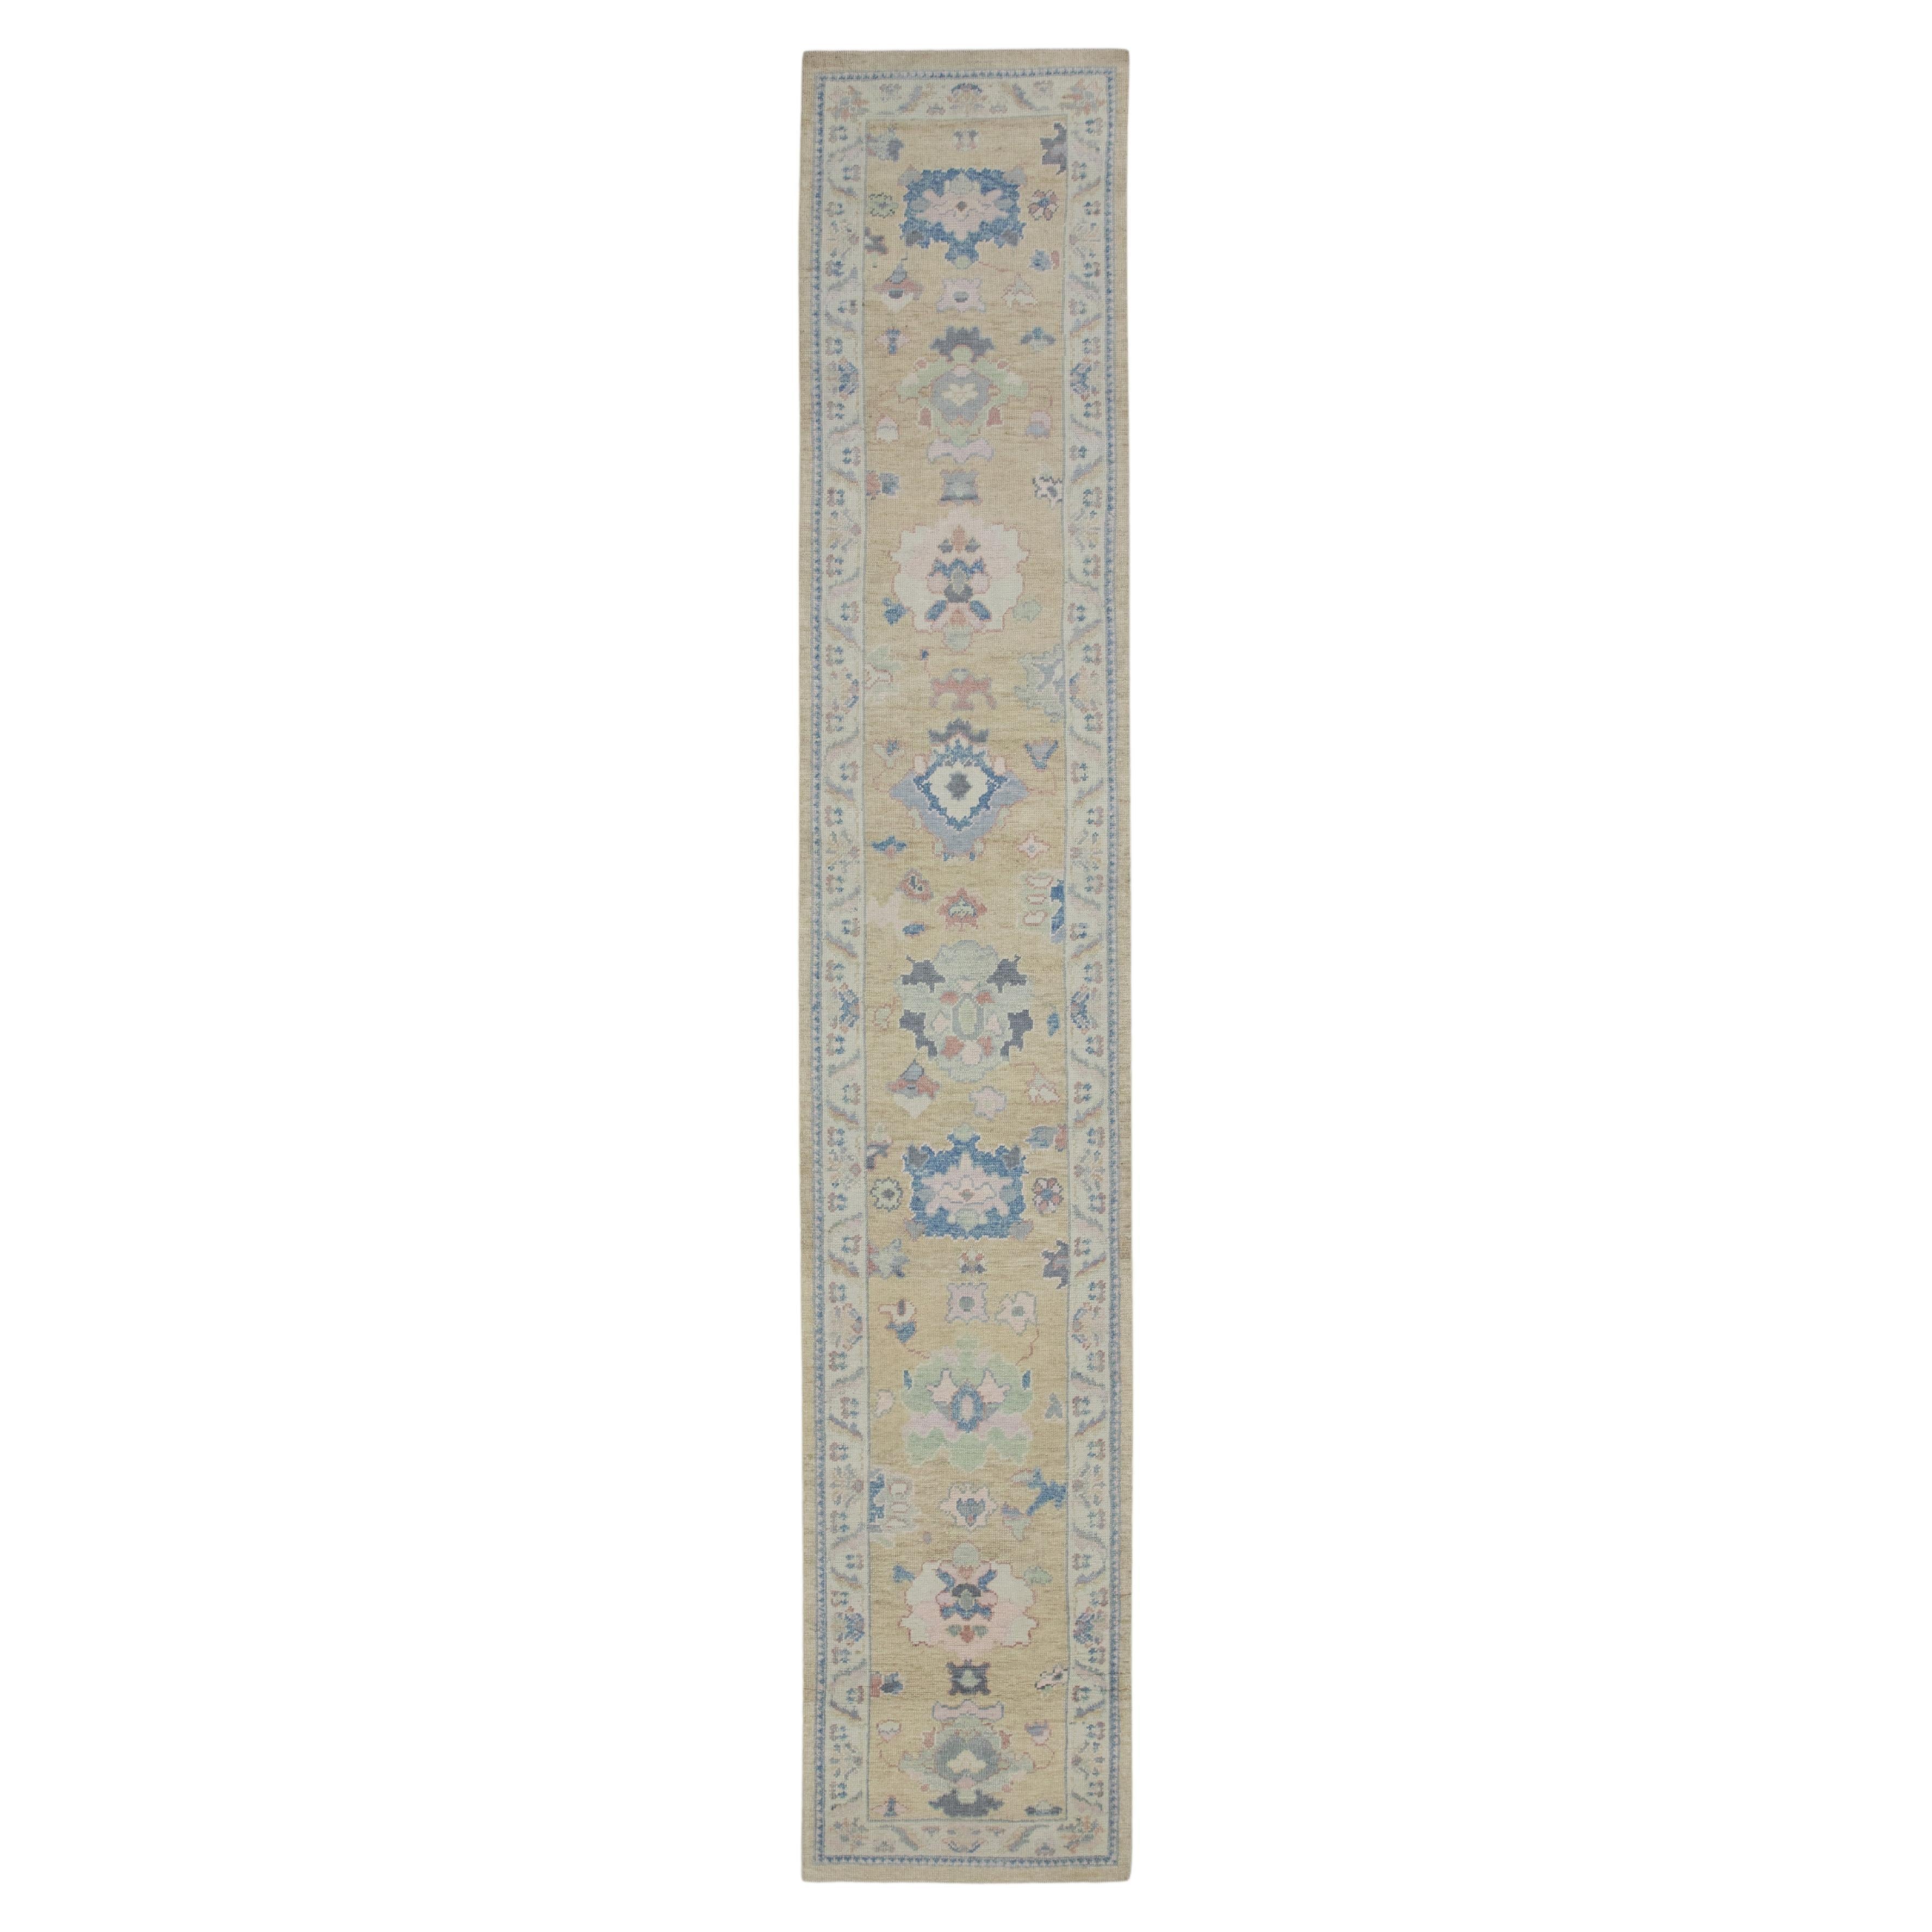 Yellow & Blue Floral Design Handwoven Wool Turkish Oushak Runner 2'9" X 15'2" For Sale